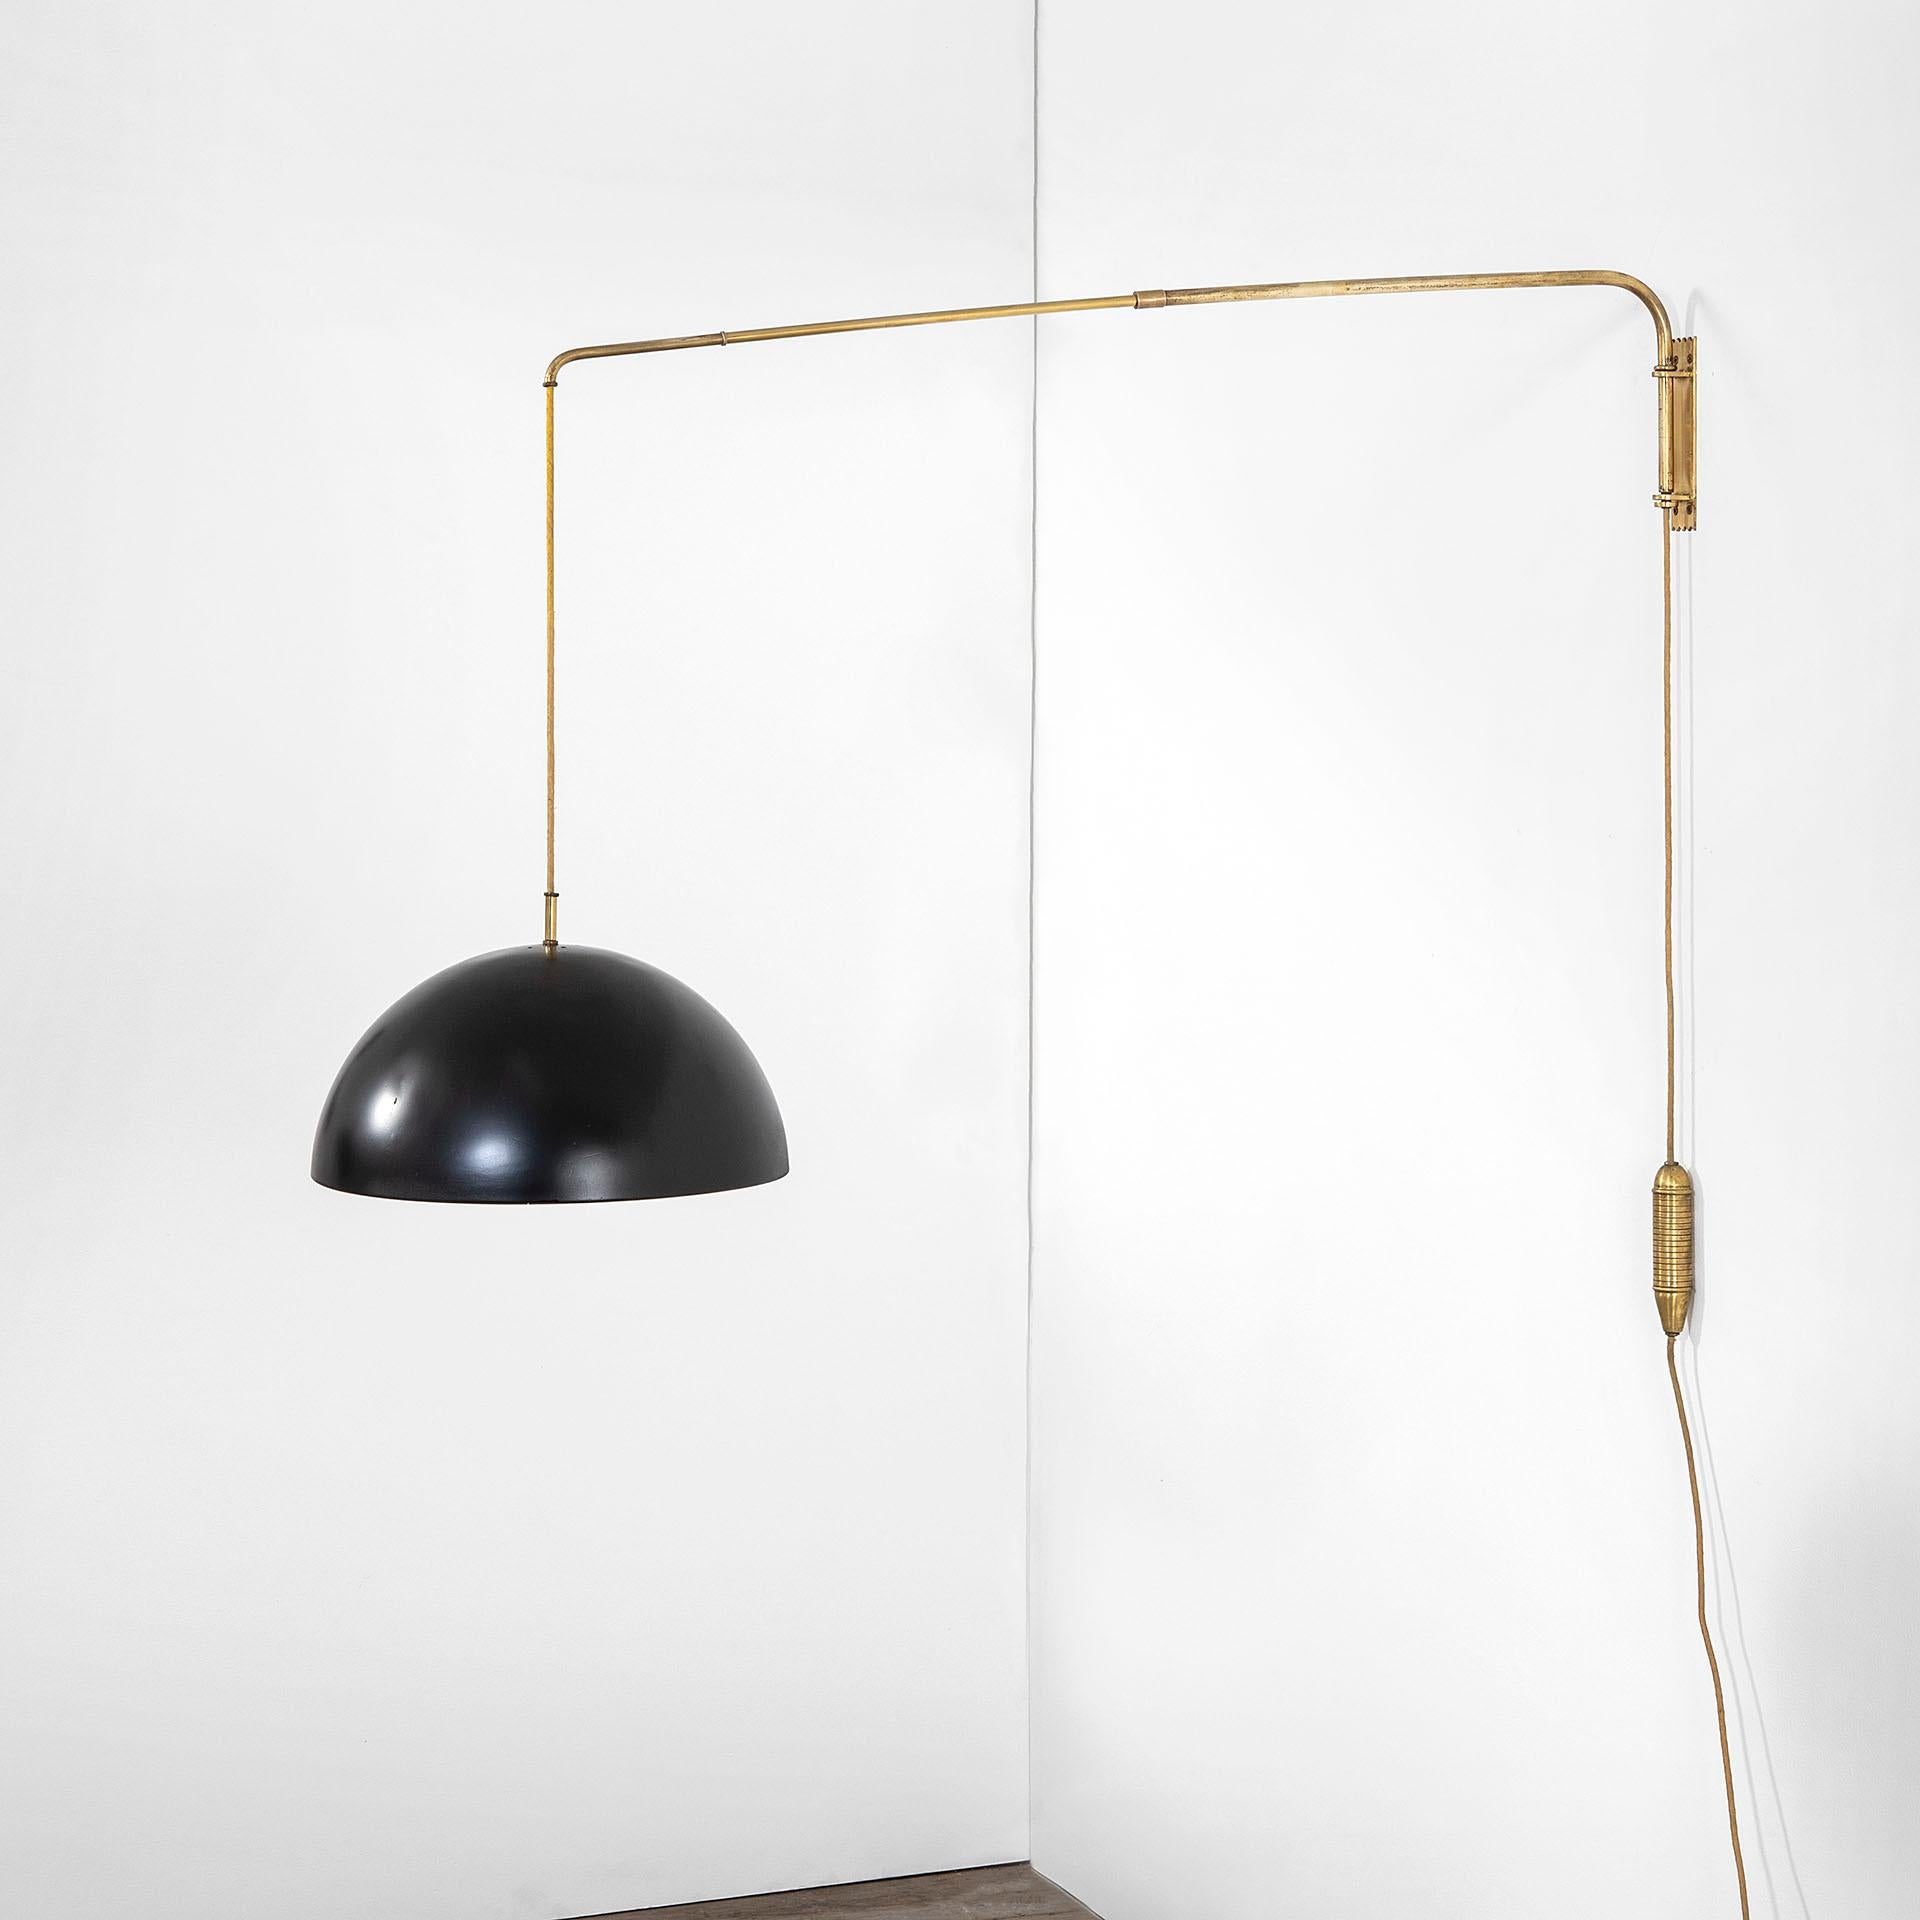 Italian 20th Century Stilnovo Wall Lamp Extendable Arm in Brass and Lacquered Metal, 50s For Sale